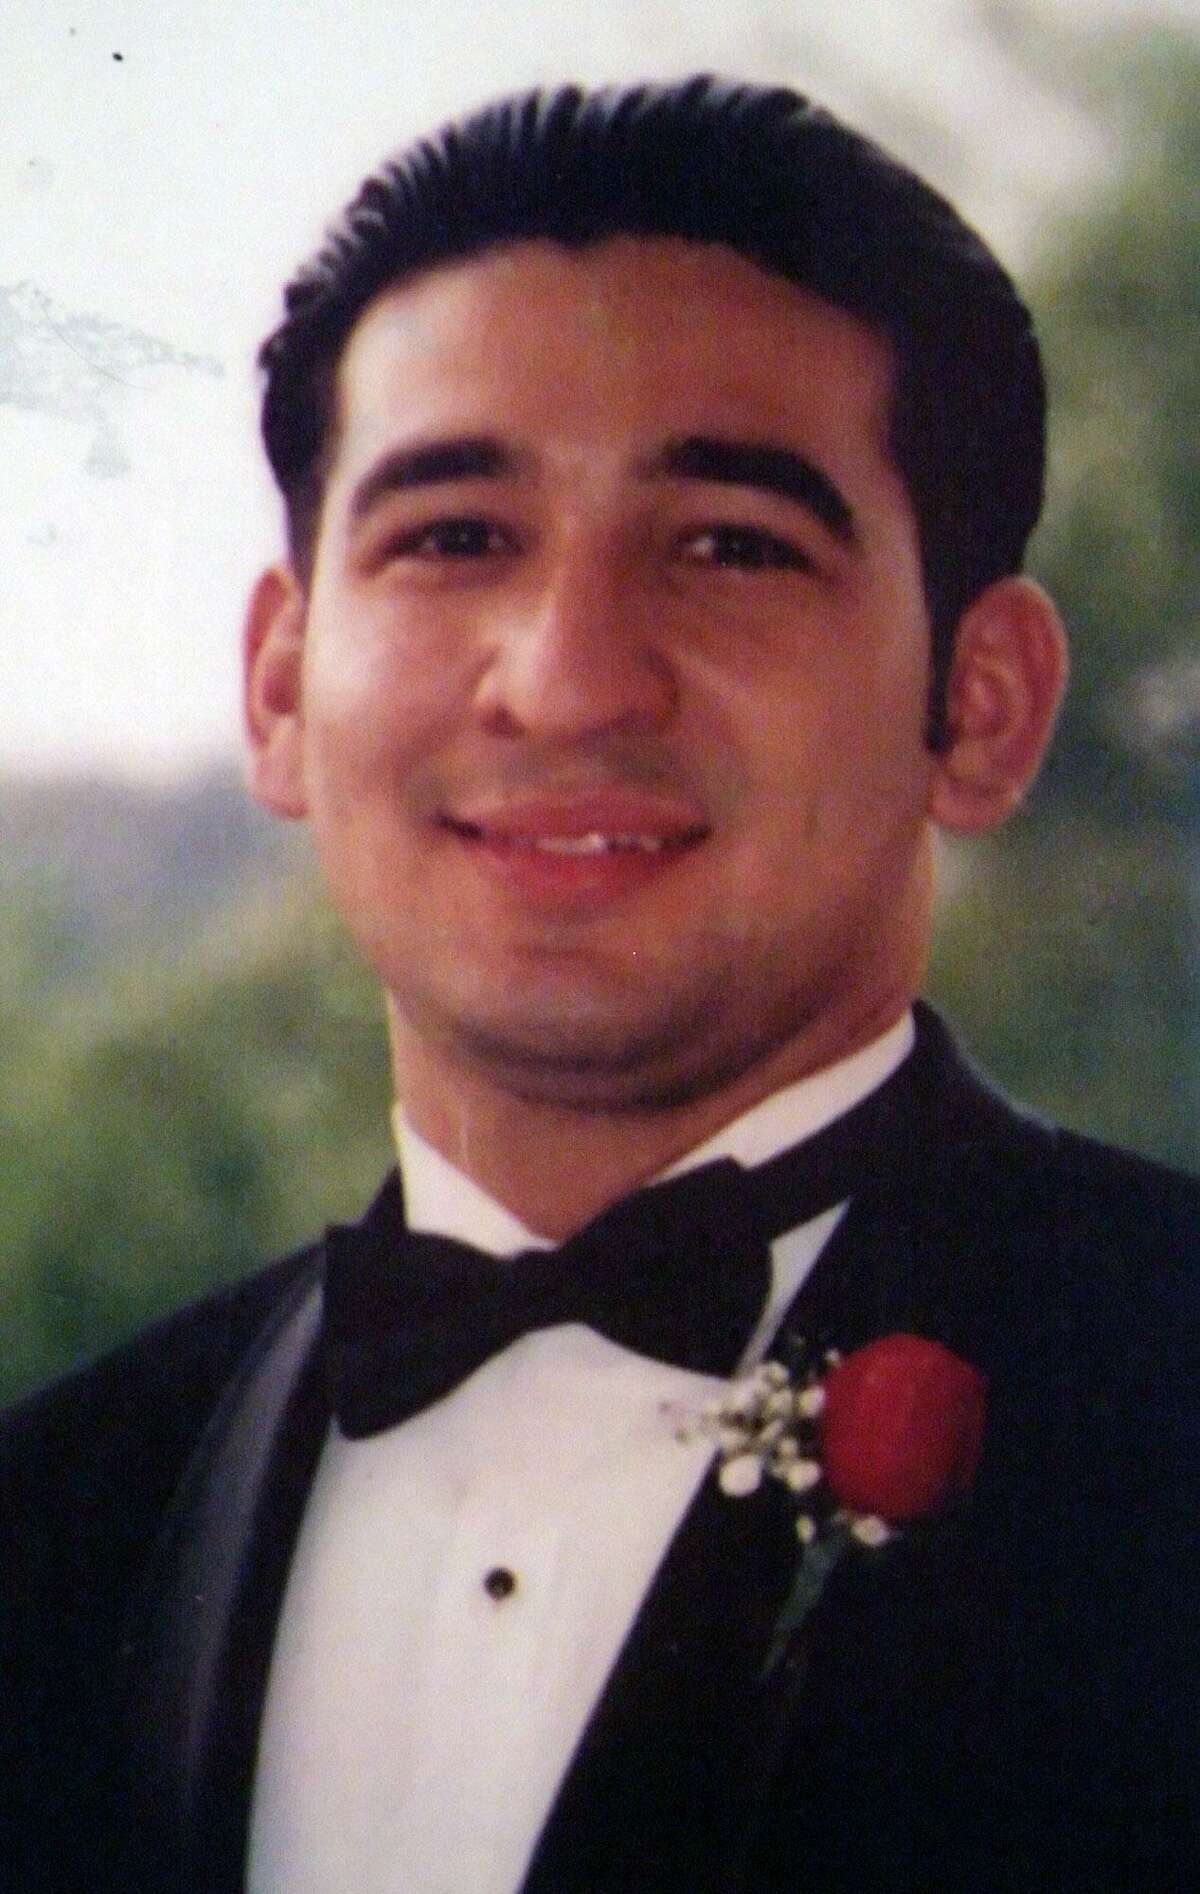 Michael LaHood Jr. was shot to death in the driveway of his parents’ San Antonio home. He was the older brother of Bexar County District Attorney Nico LaHood.